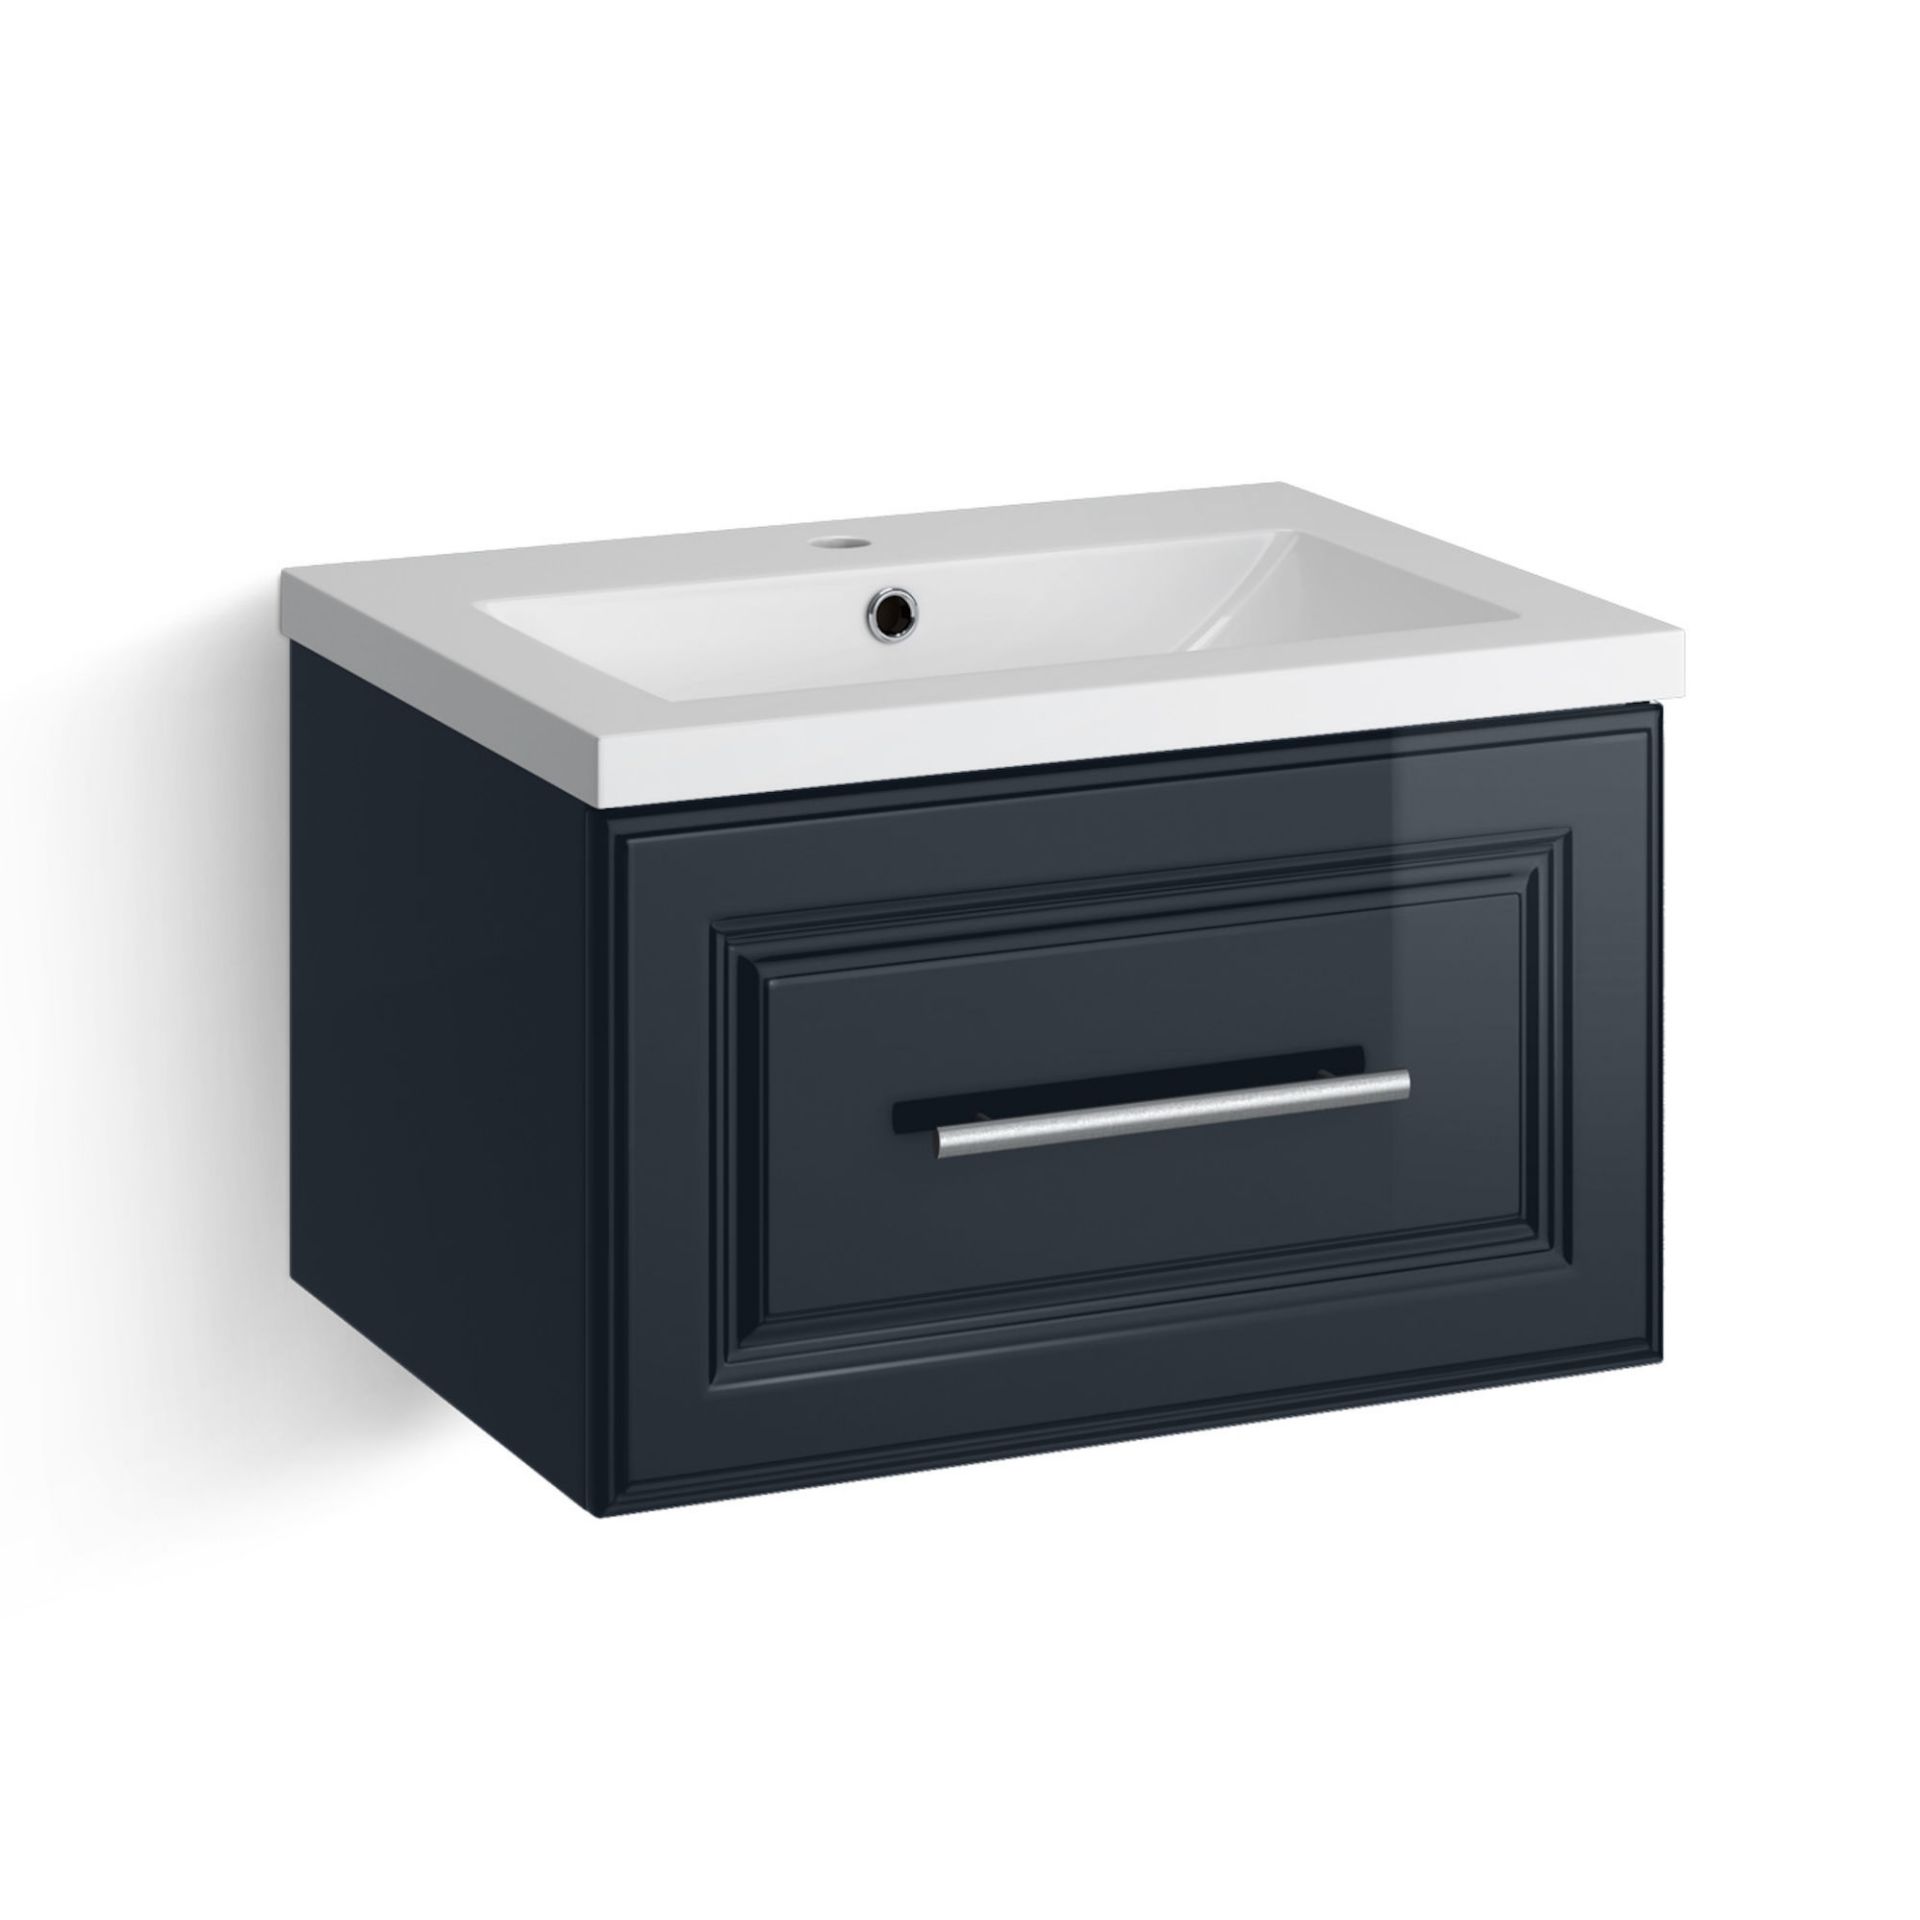 (XM188) 600mm Arden Gloss Black Blue Vanity Unit - Wall Hung. RRP £499.99. Comes complete with - Image 2 of 4